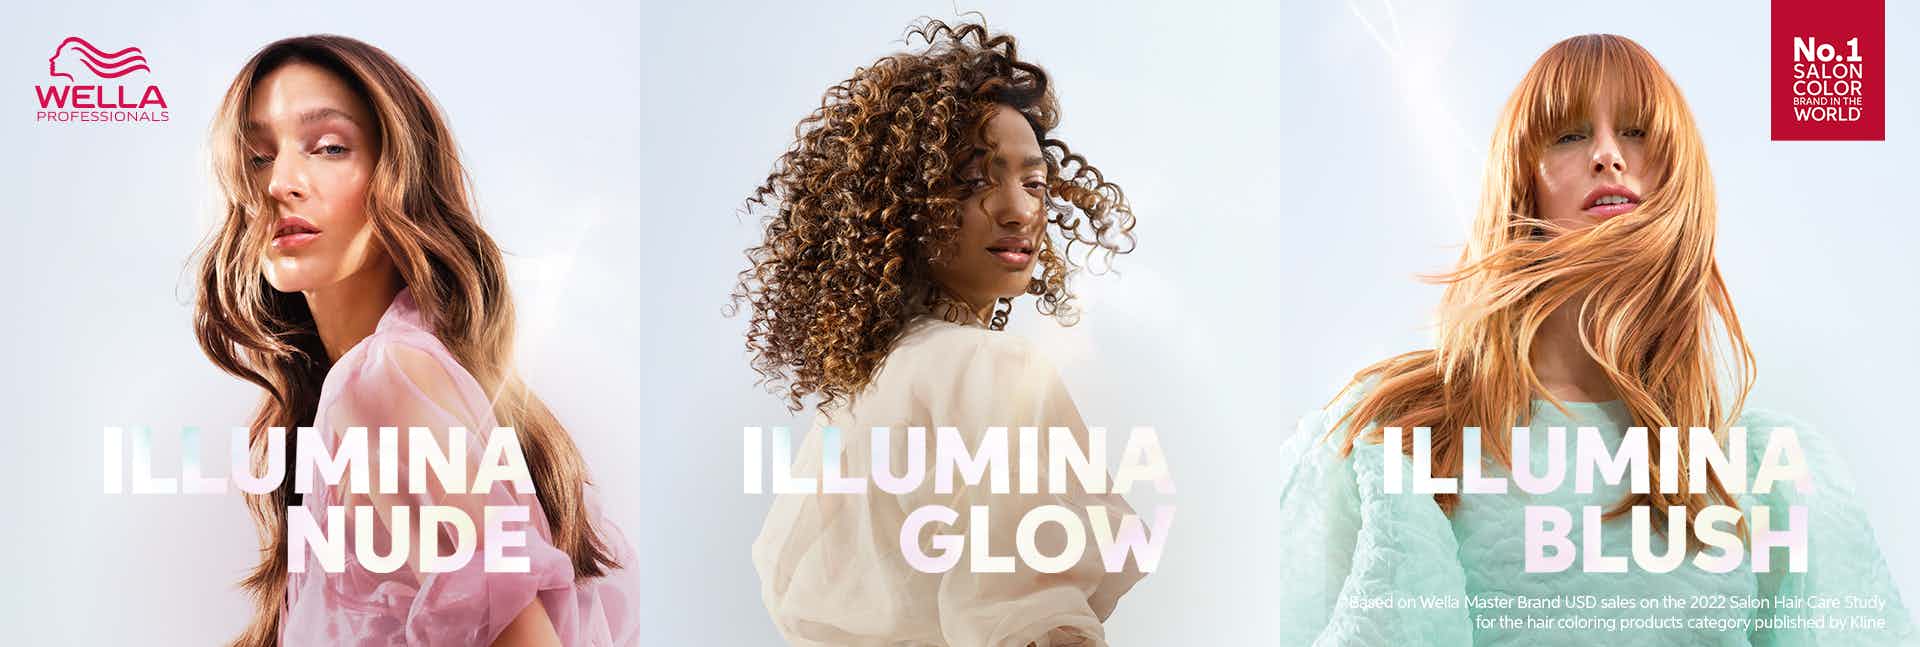 Three glamorous models showcasing their breathtaking looks with the incredible results of Illumina's natural hair color.